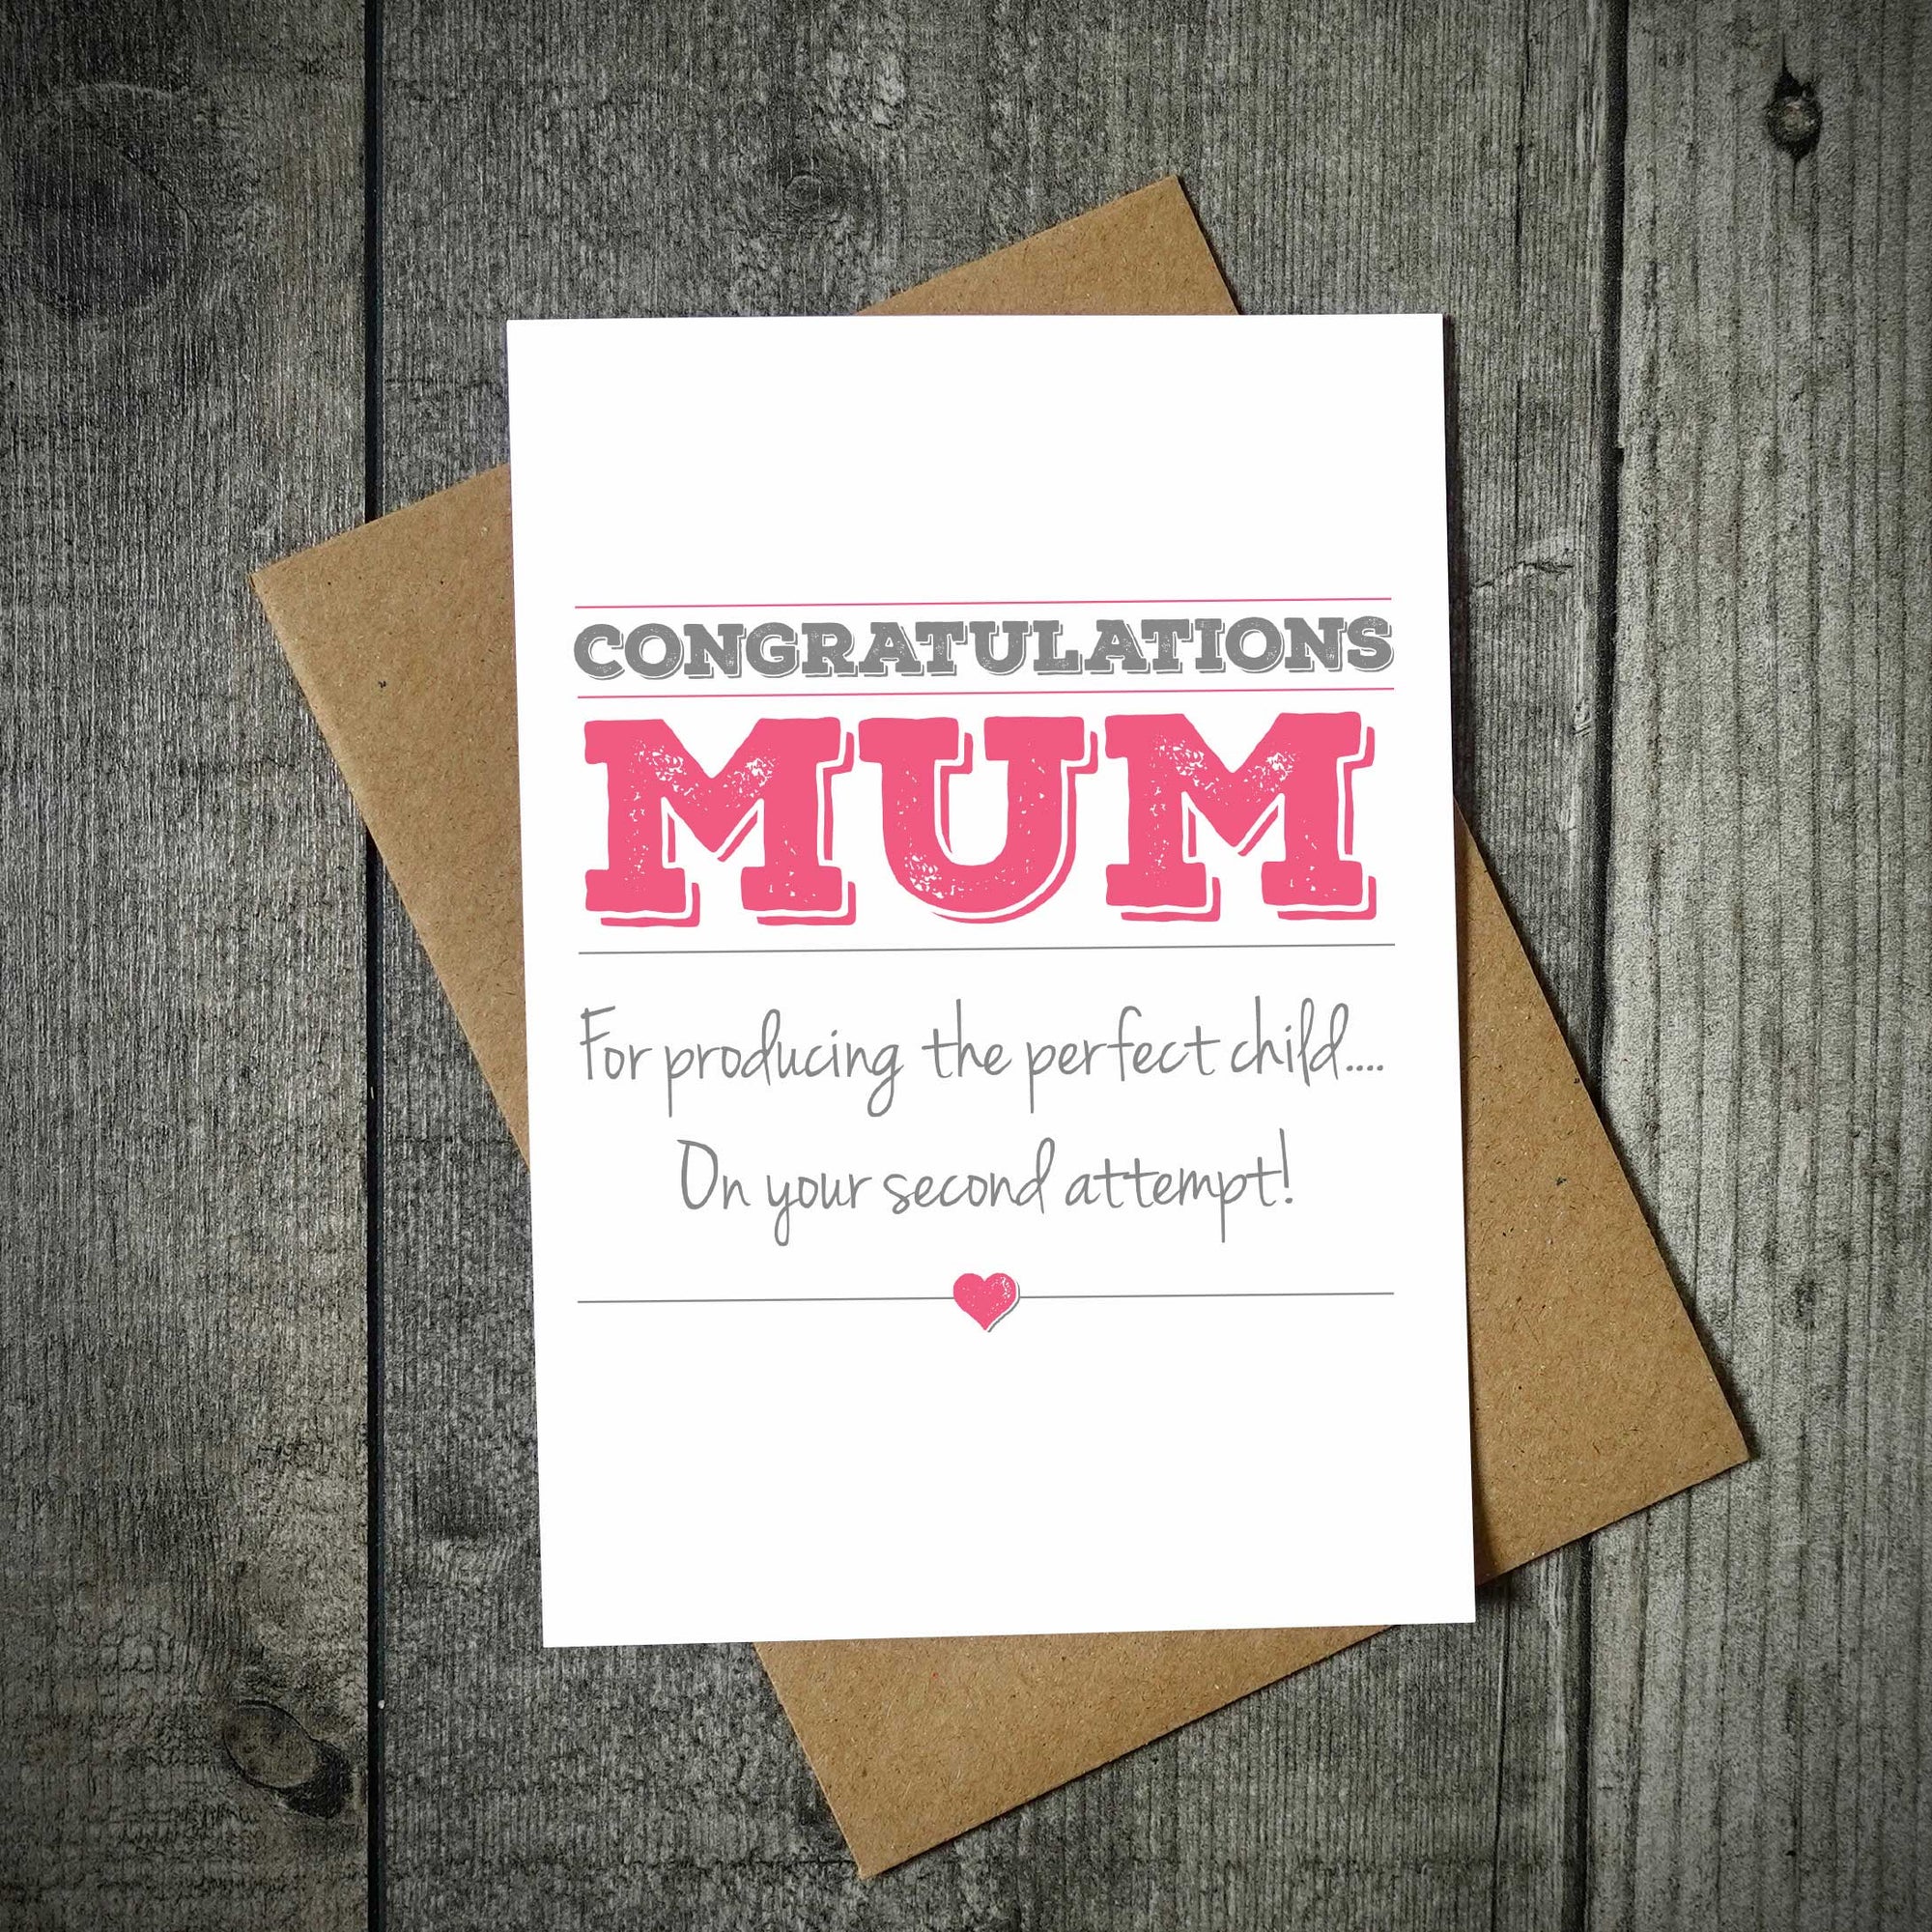 Congratulations Mum On Producing The Perfect Child Mother's Day Card